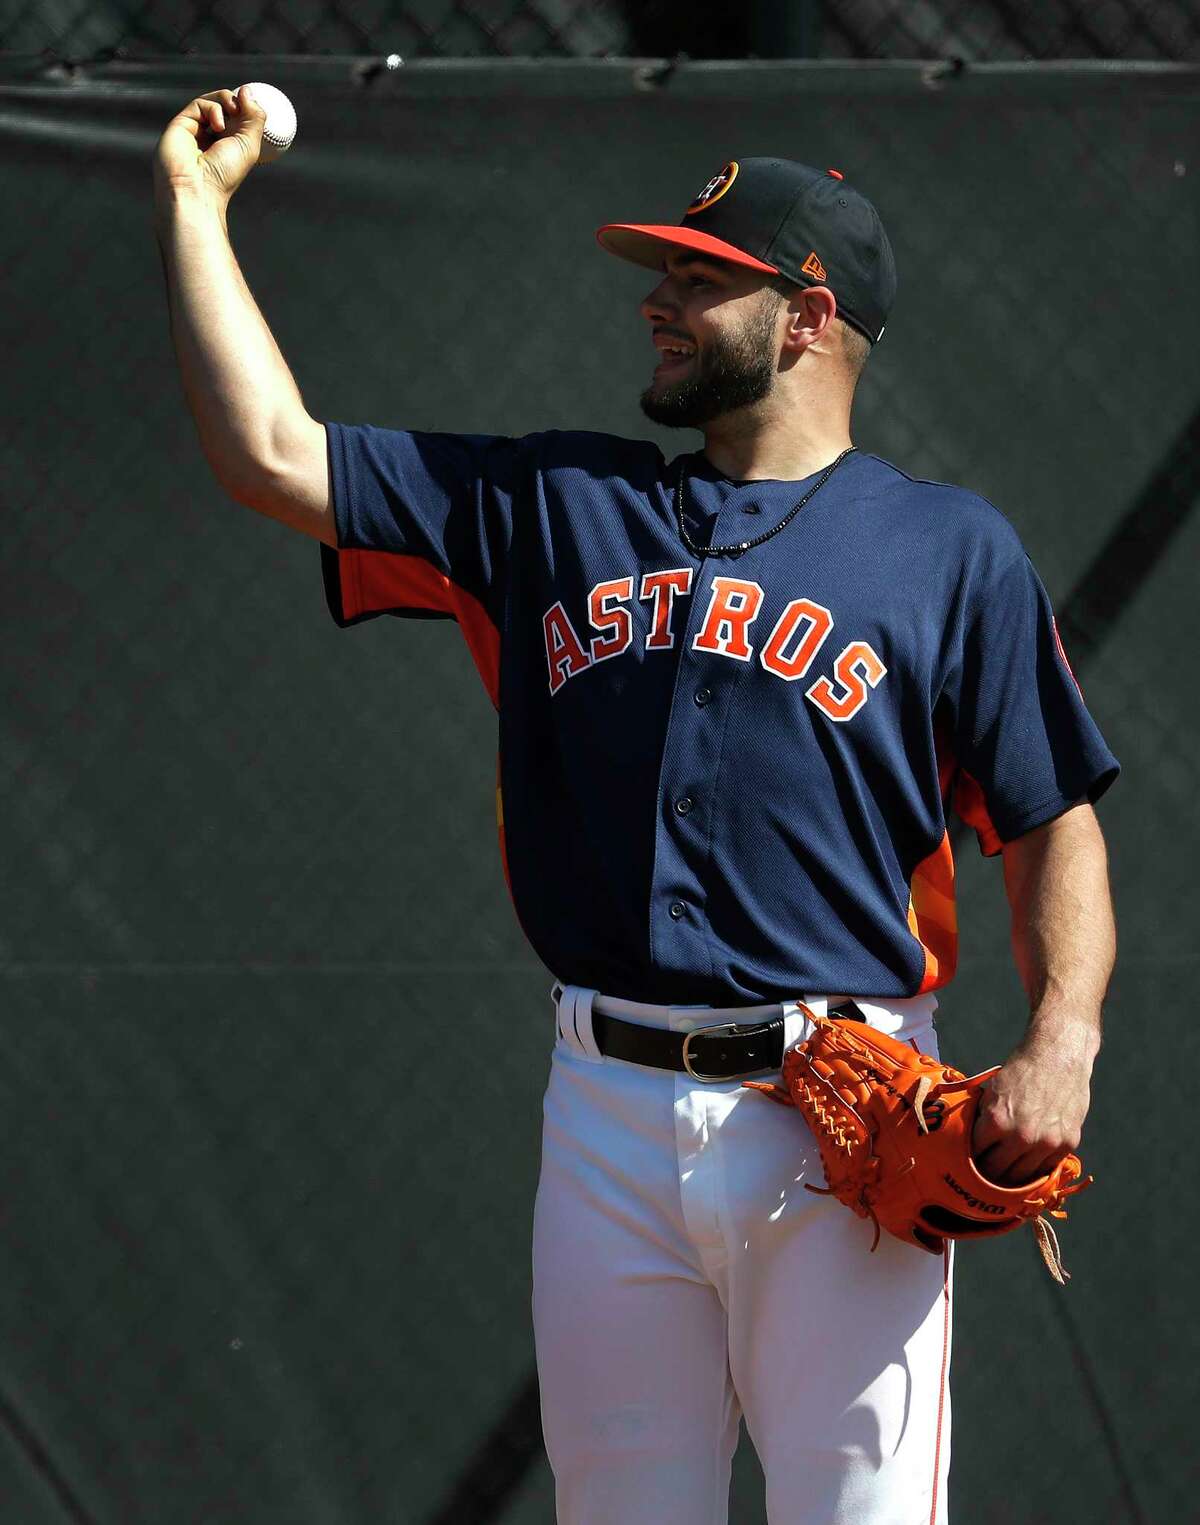 Houston Astros RHP pitcher Lance McCullers Jr. (43) makes adjustments between pitches in his bullpen session during spring training at The Ballpark of the Palm Beaches, Saturday, Feb. 17, 2018, in West Palm Beach ( Karen Warren / Houston Chronicle )